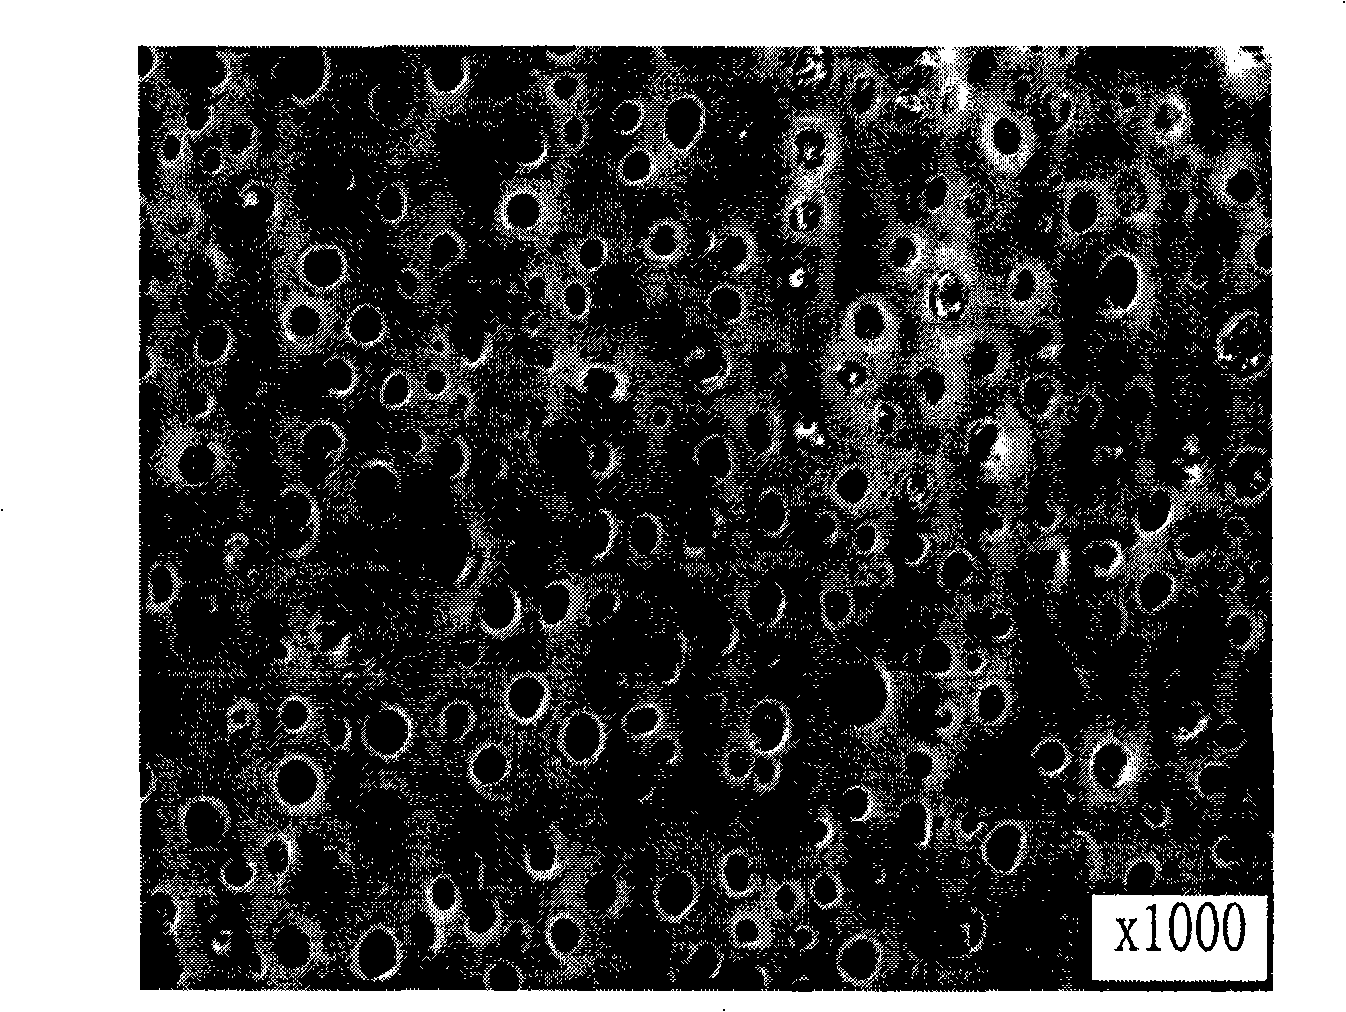 Activated gel state lithium ionic cell polymer electrolyte film, preparation and use thereof